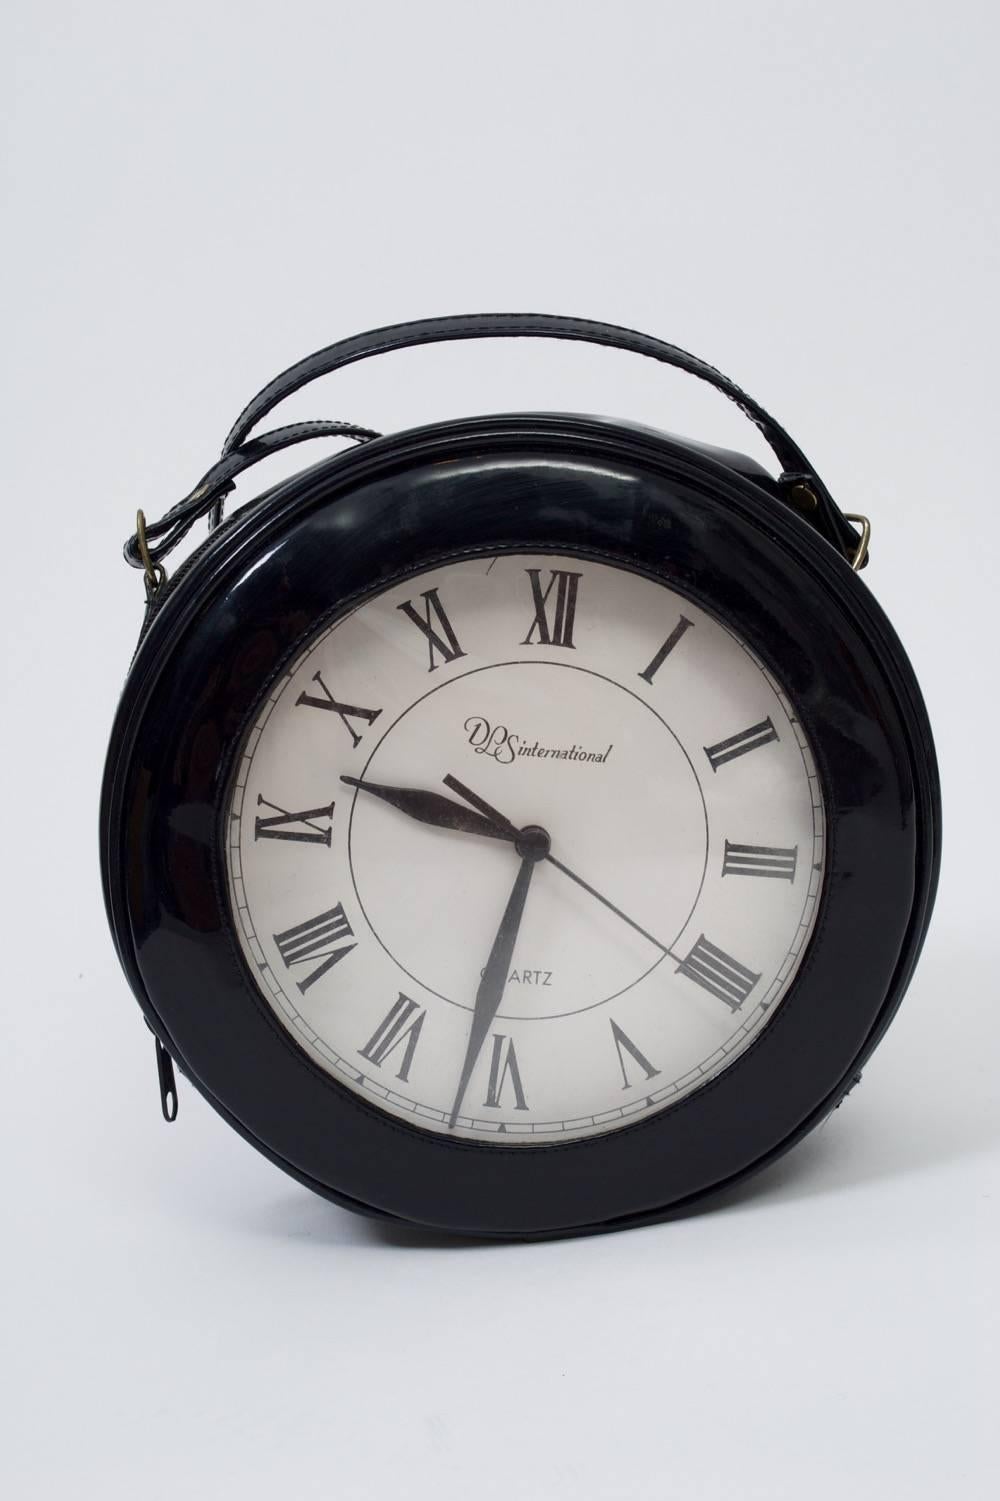 Black patent circular shoulder bag with roman-numeral clock face is a conversation piece. clock runs by battery and is housed in separate interior compartment. Top zipper.